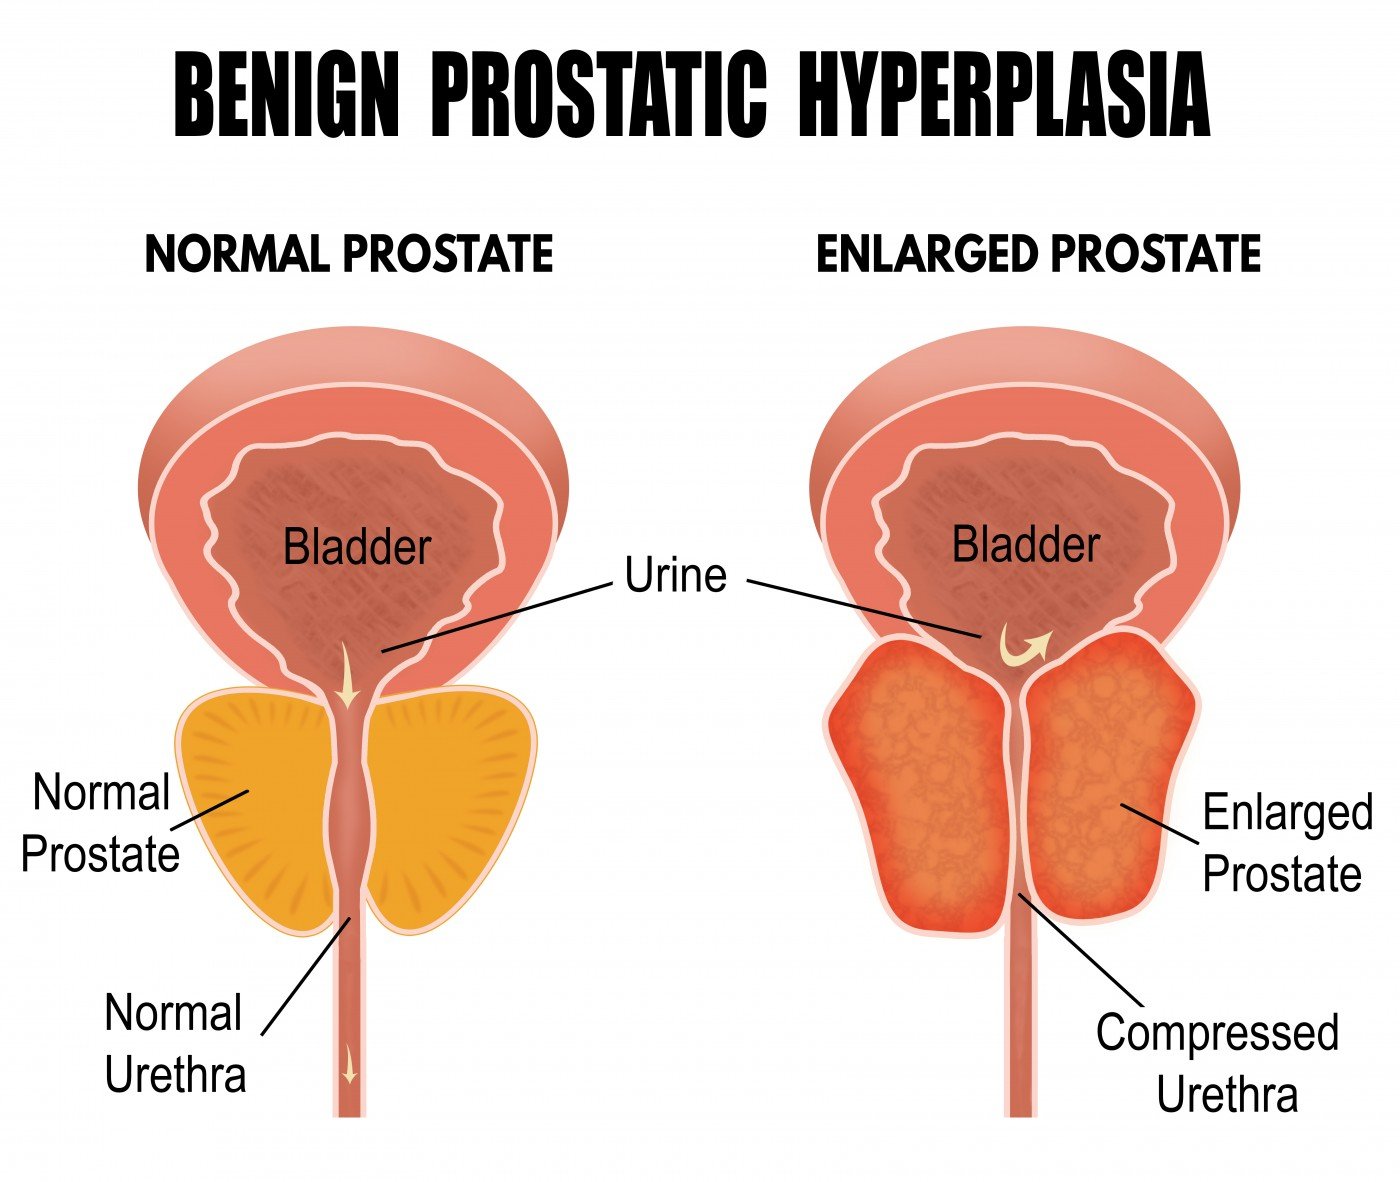 Enlarged Prostate: What You Need to Know